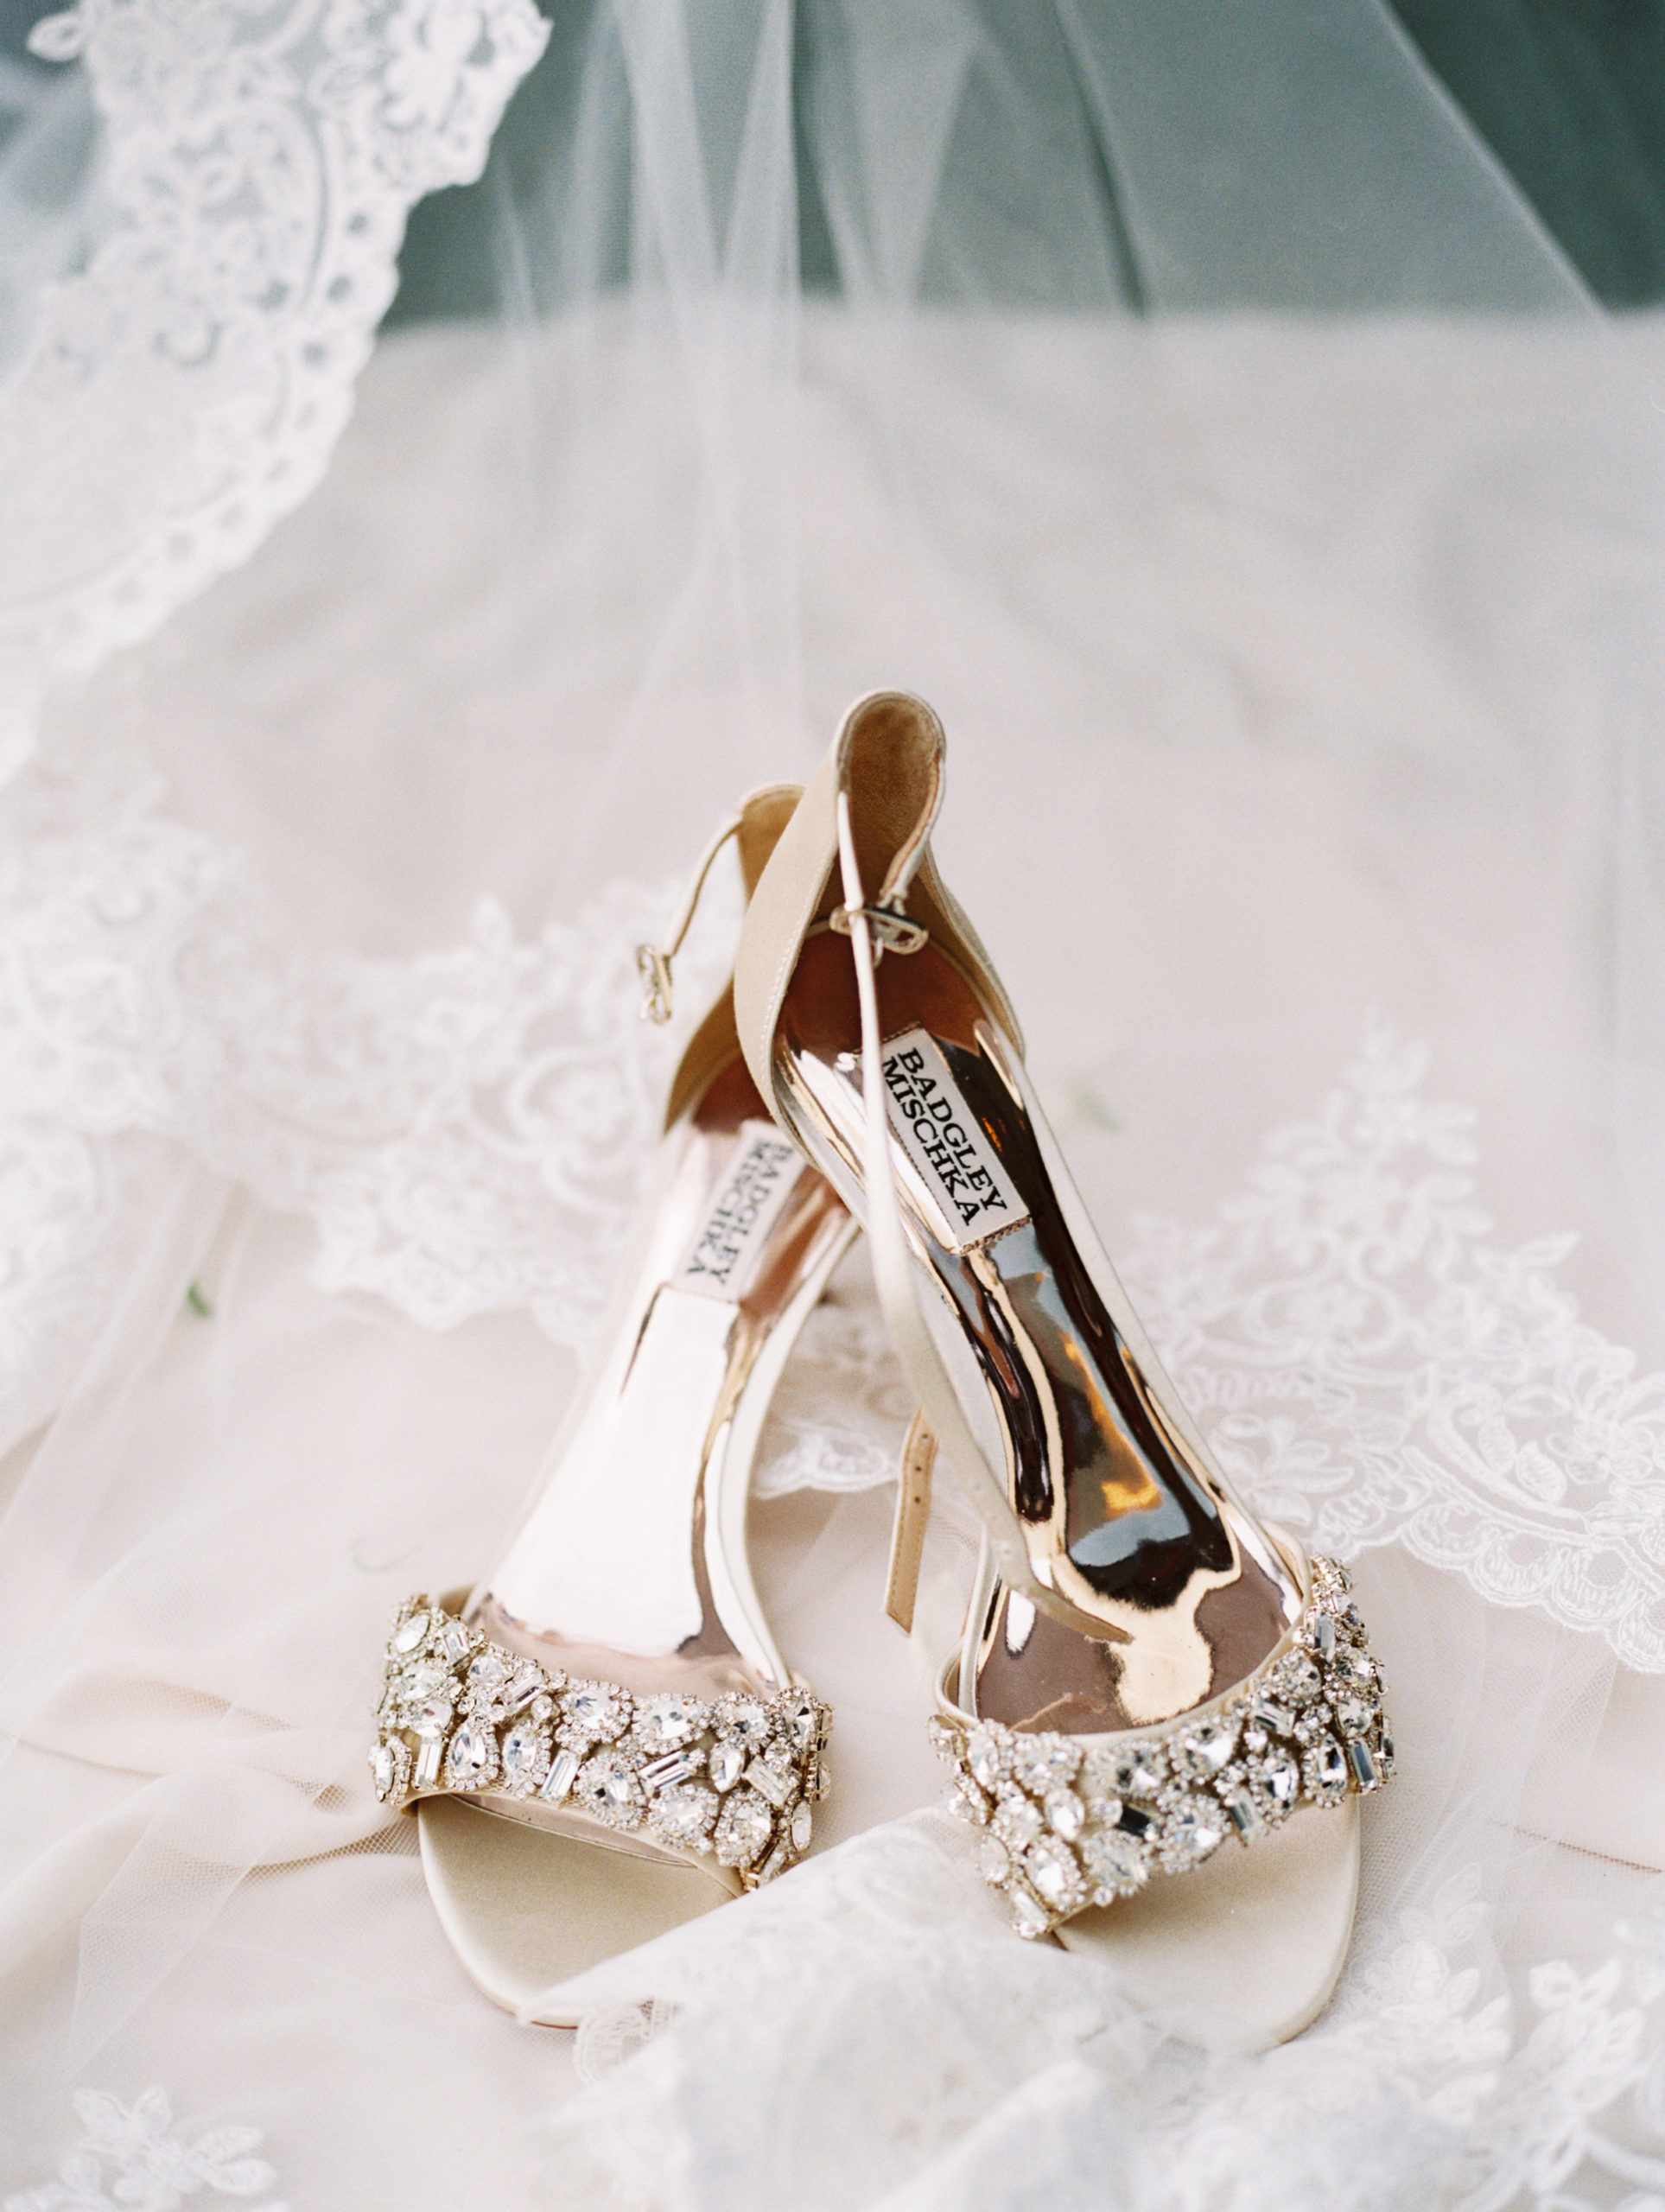 OMG Shoes! Different Style Shoes for Your Wedding Day | yj life